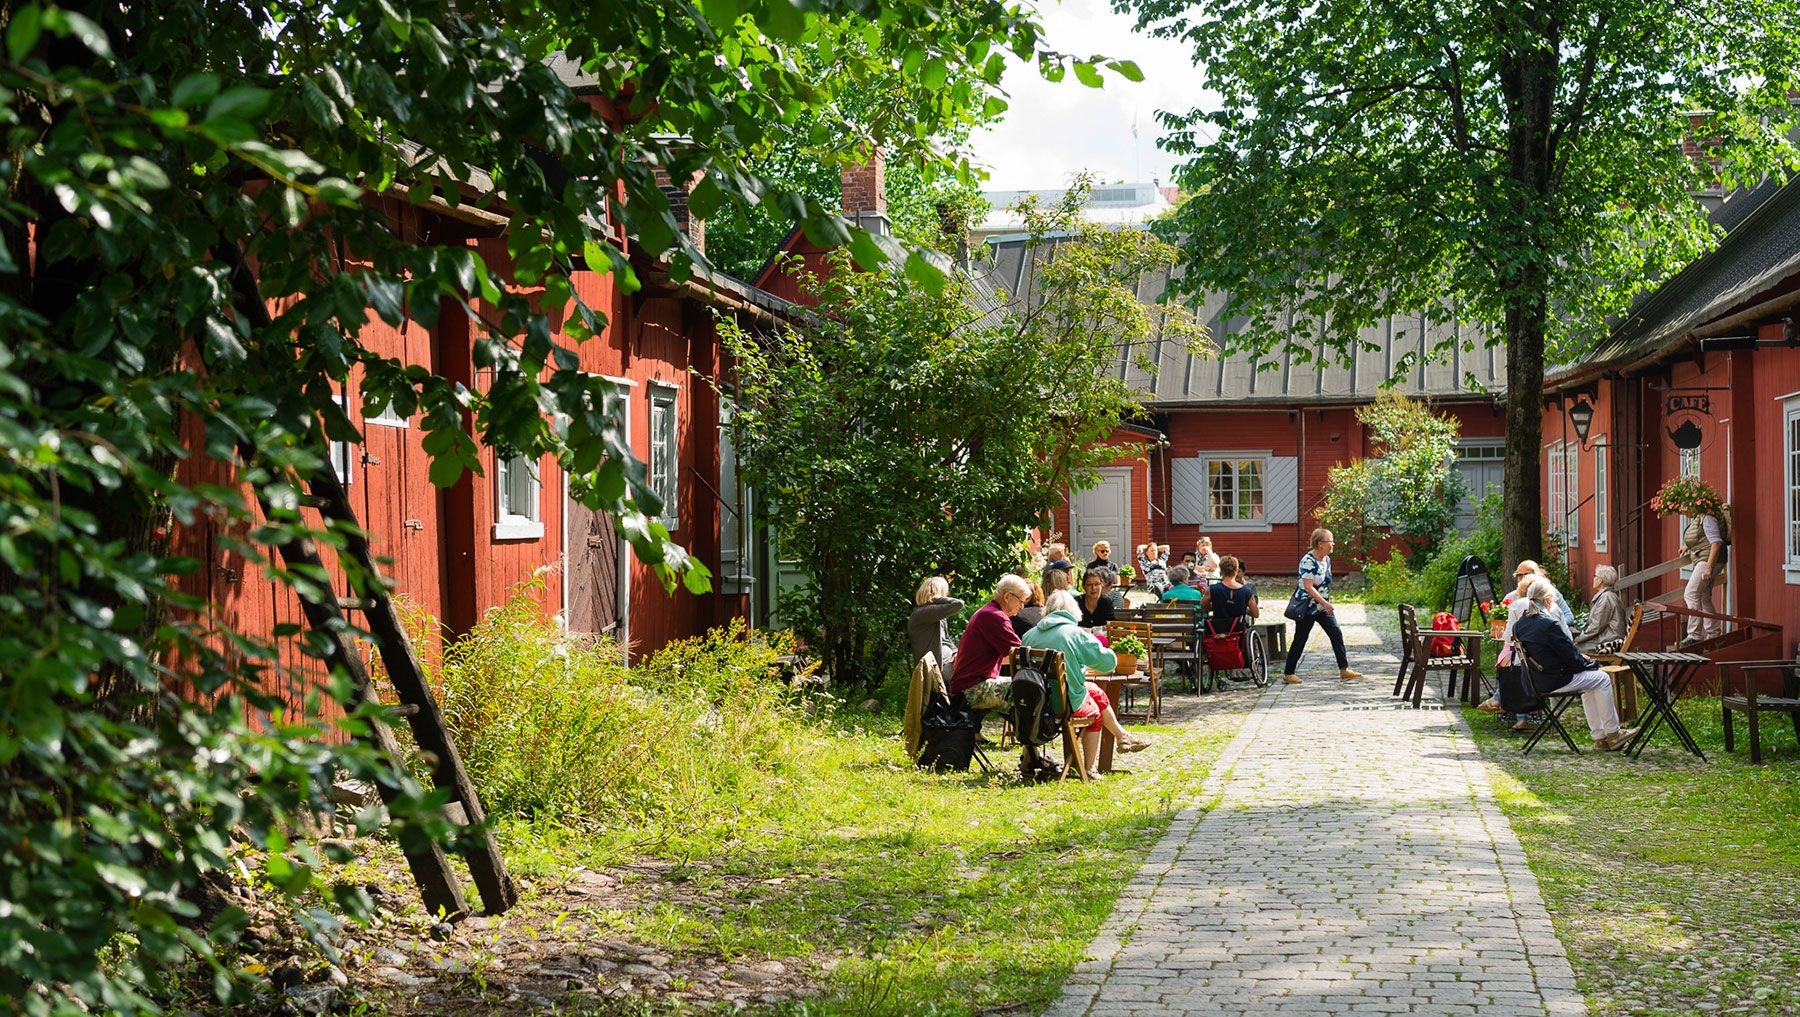 Visitors sit in Cafe Qwensel's outside garden, enjoying coffee and cake.